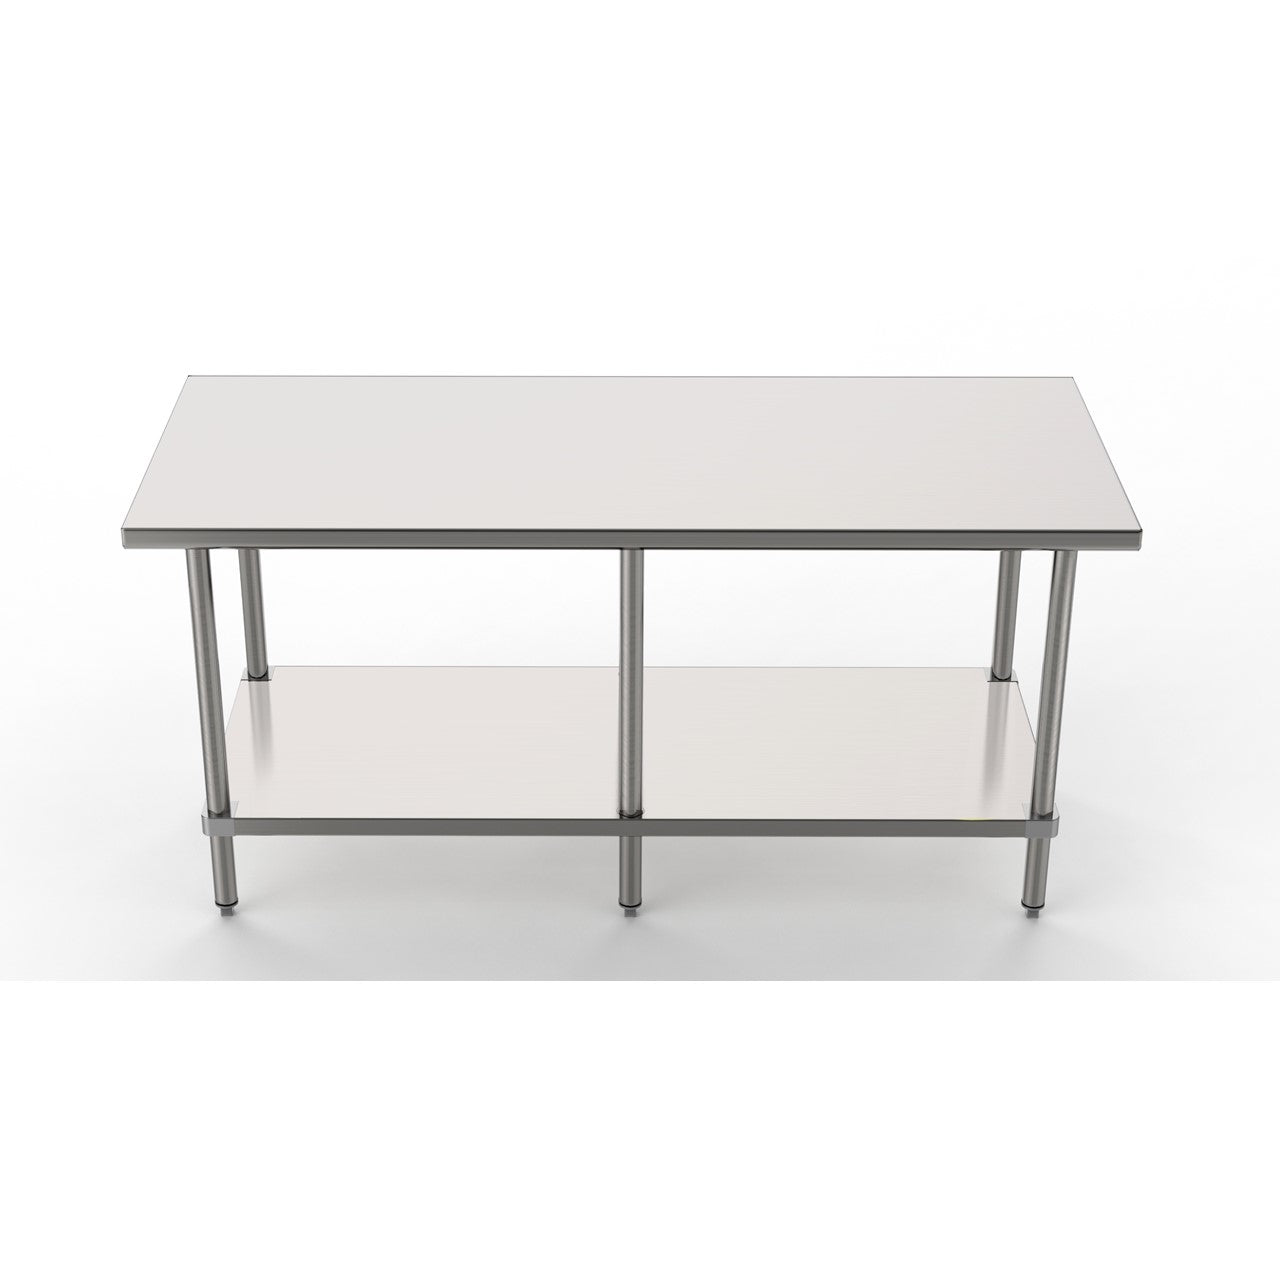 GSW Commercial Grade Flat Top Work Table with All Stainless Steel Top, Undershelf & Legs, Adjustable Bullet Feet, NSF & ETL Approved to Meet Sanitation Food Service Standard 37 (30"D x 96"L x 35"H)